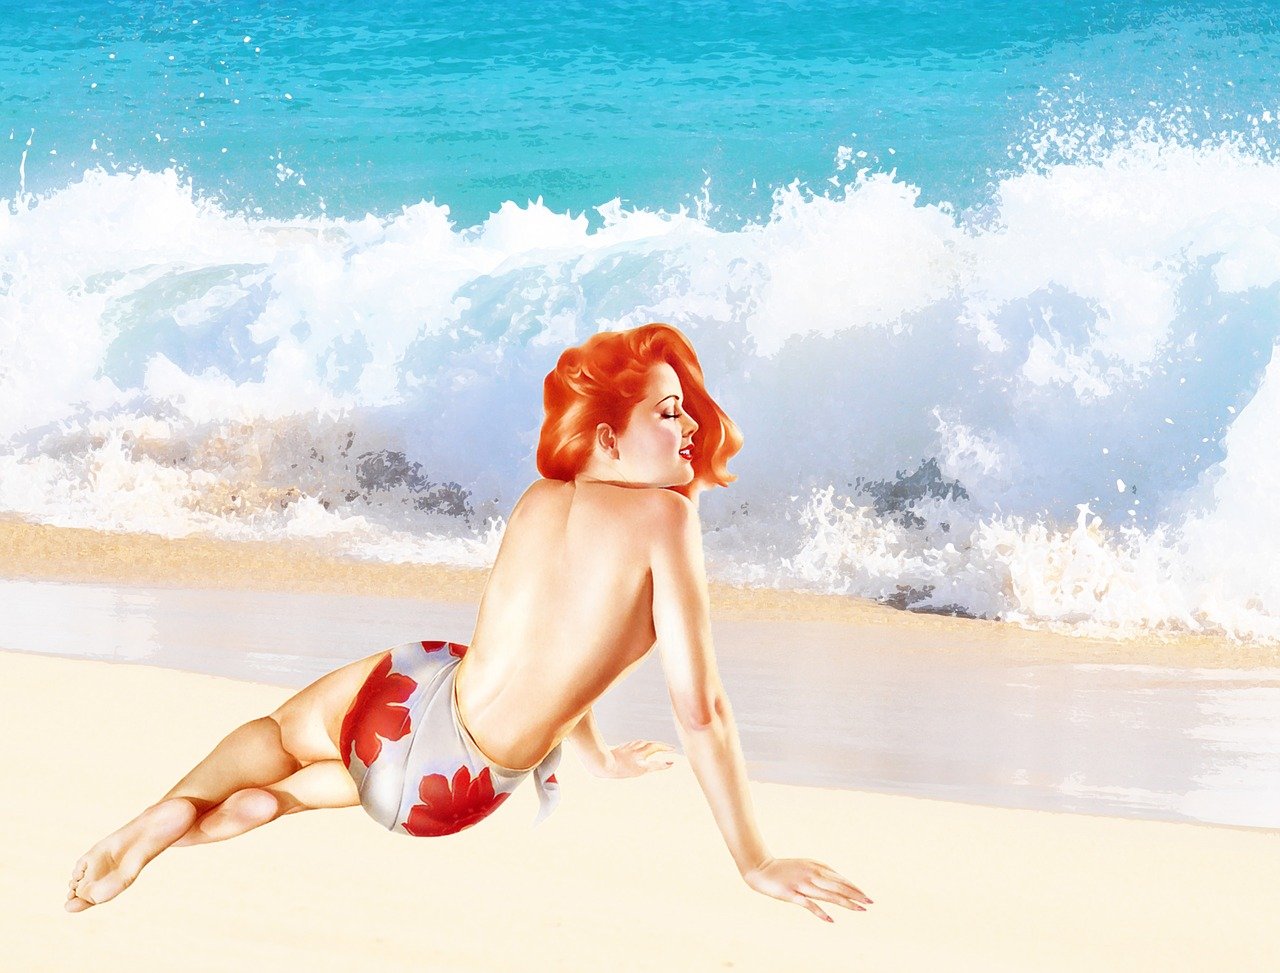 a woman laying on top of a sandy beach next to the ocean, a photorealistic painting, inspired by Bunny Yeager, tumblr, with red hair, photomanipulation, petra cortright, lana del rey